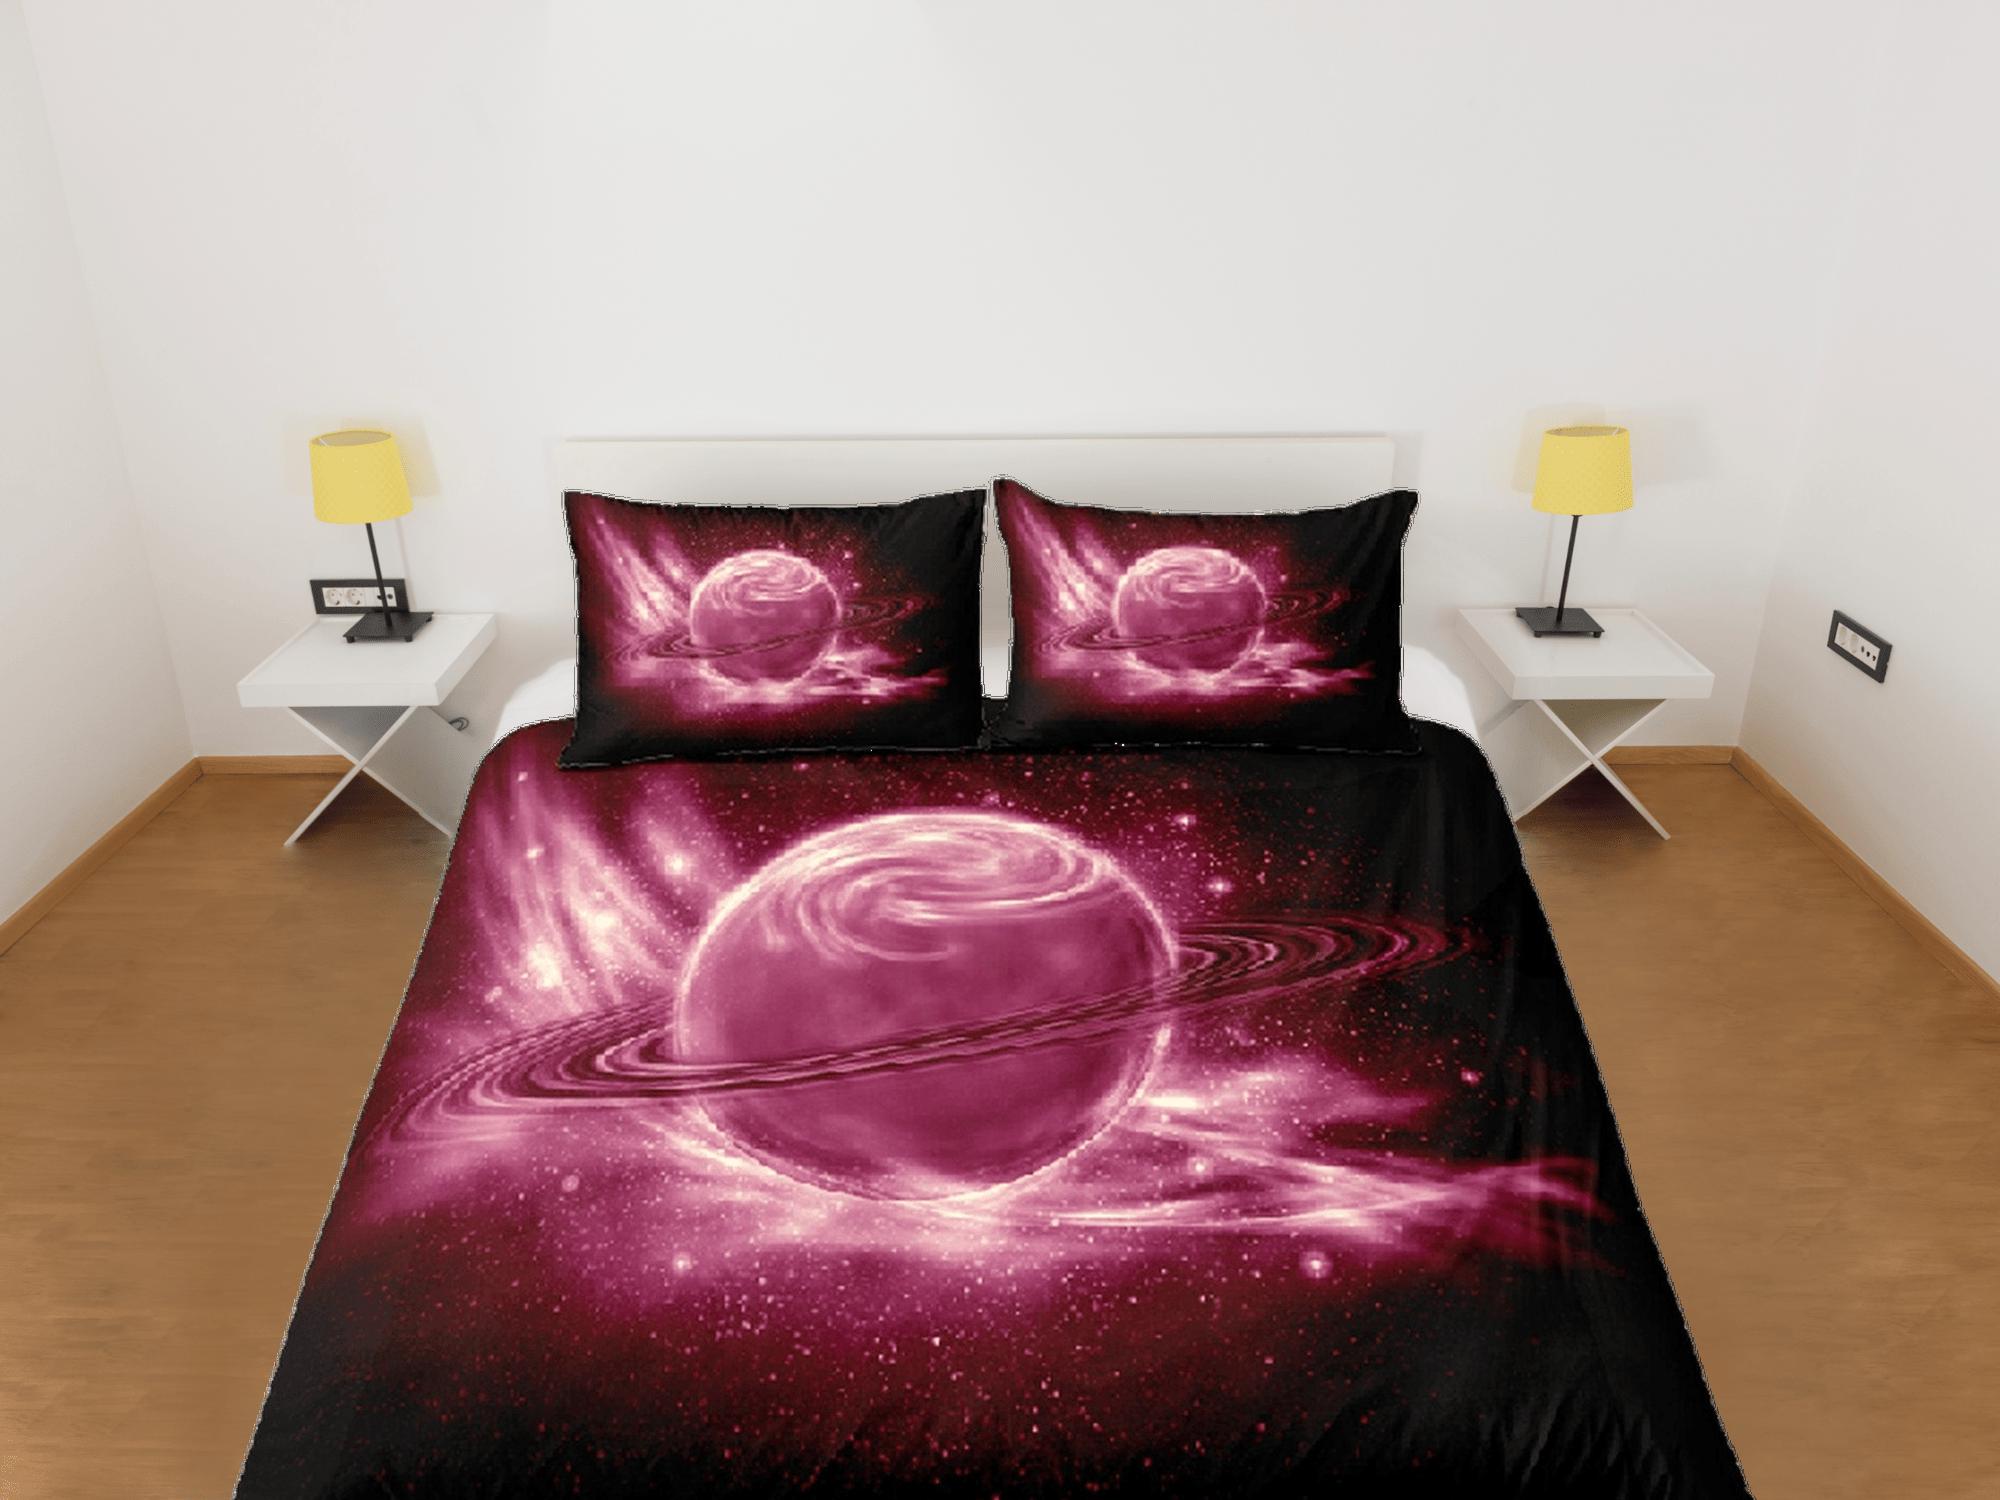 daintyduvet Pink planet duvet cover set, Saturn galaxy bedding, outer space bedding set full, duvet cover king, queen, dorm bedding, toddler bedding